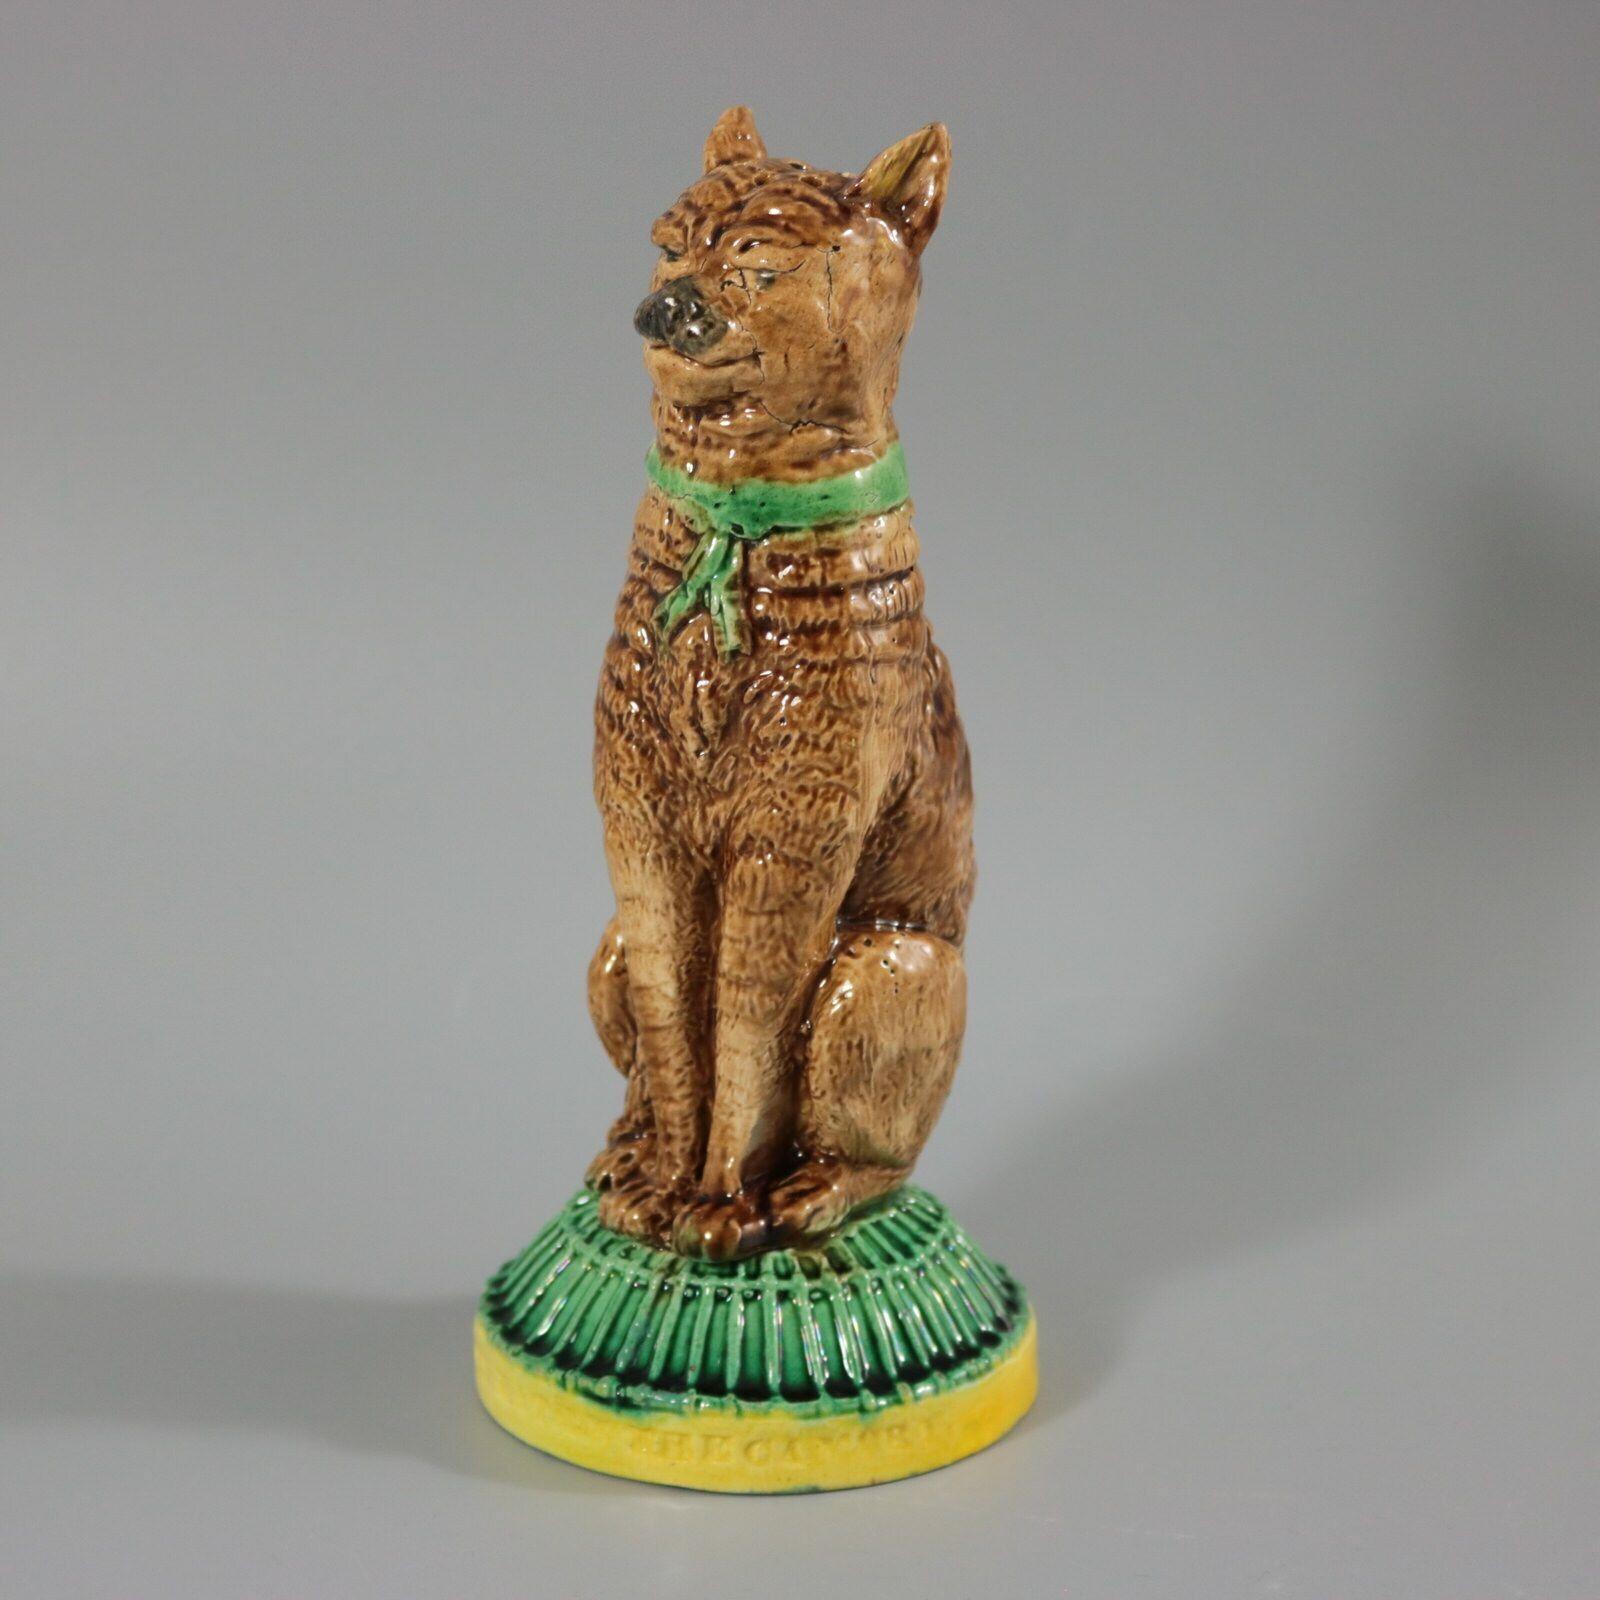 Unidentified English Majolica pepper/salt shaker which features a seated cat, with a self-satisfied expression on it's face. Base in the form of a cage, impressed, 'IVE EATEN THE CANARY'. Colouration: brown, green, yellow, are predominant.